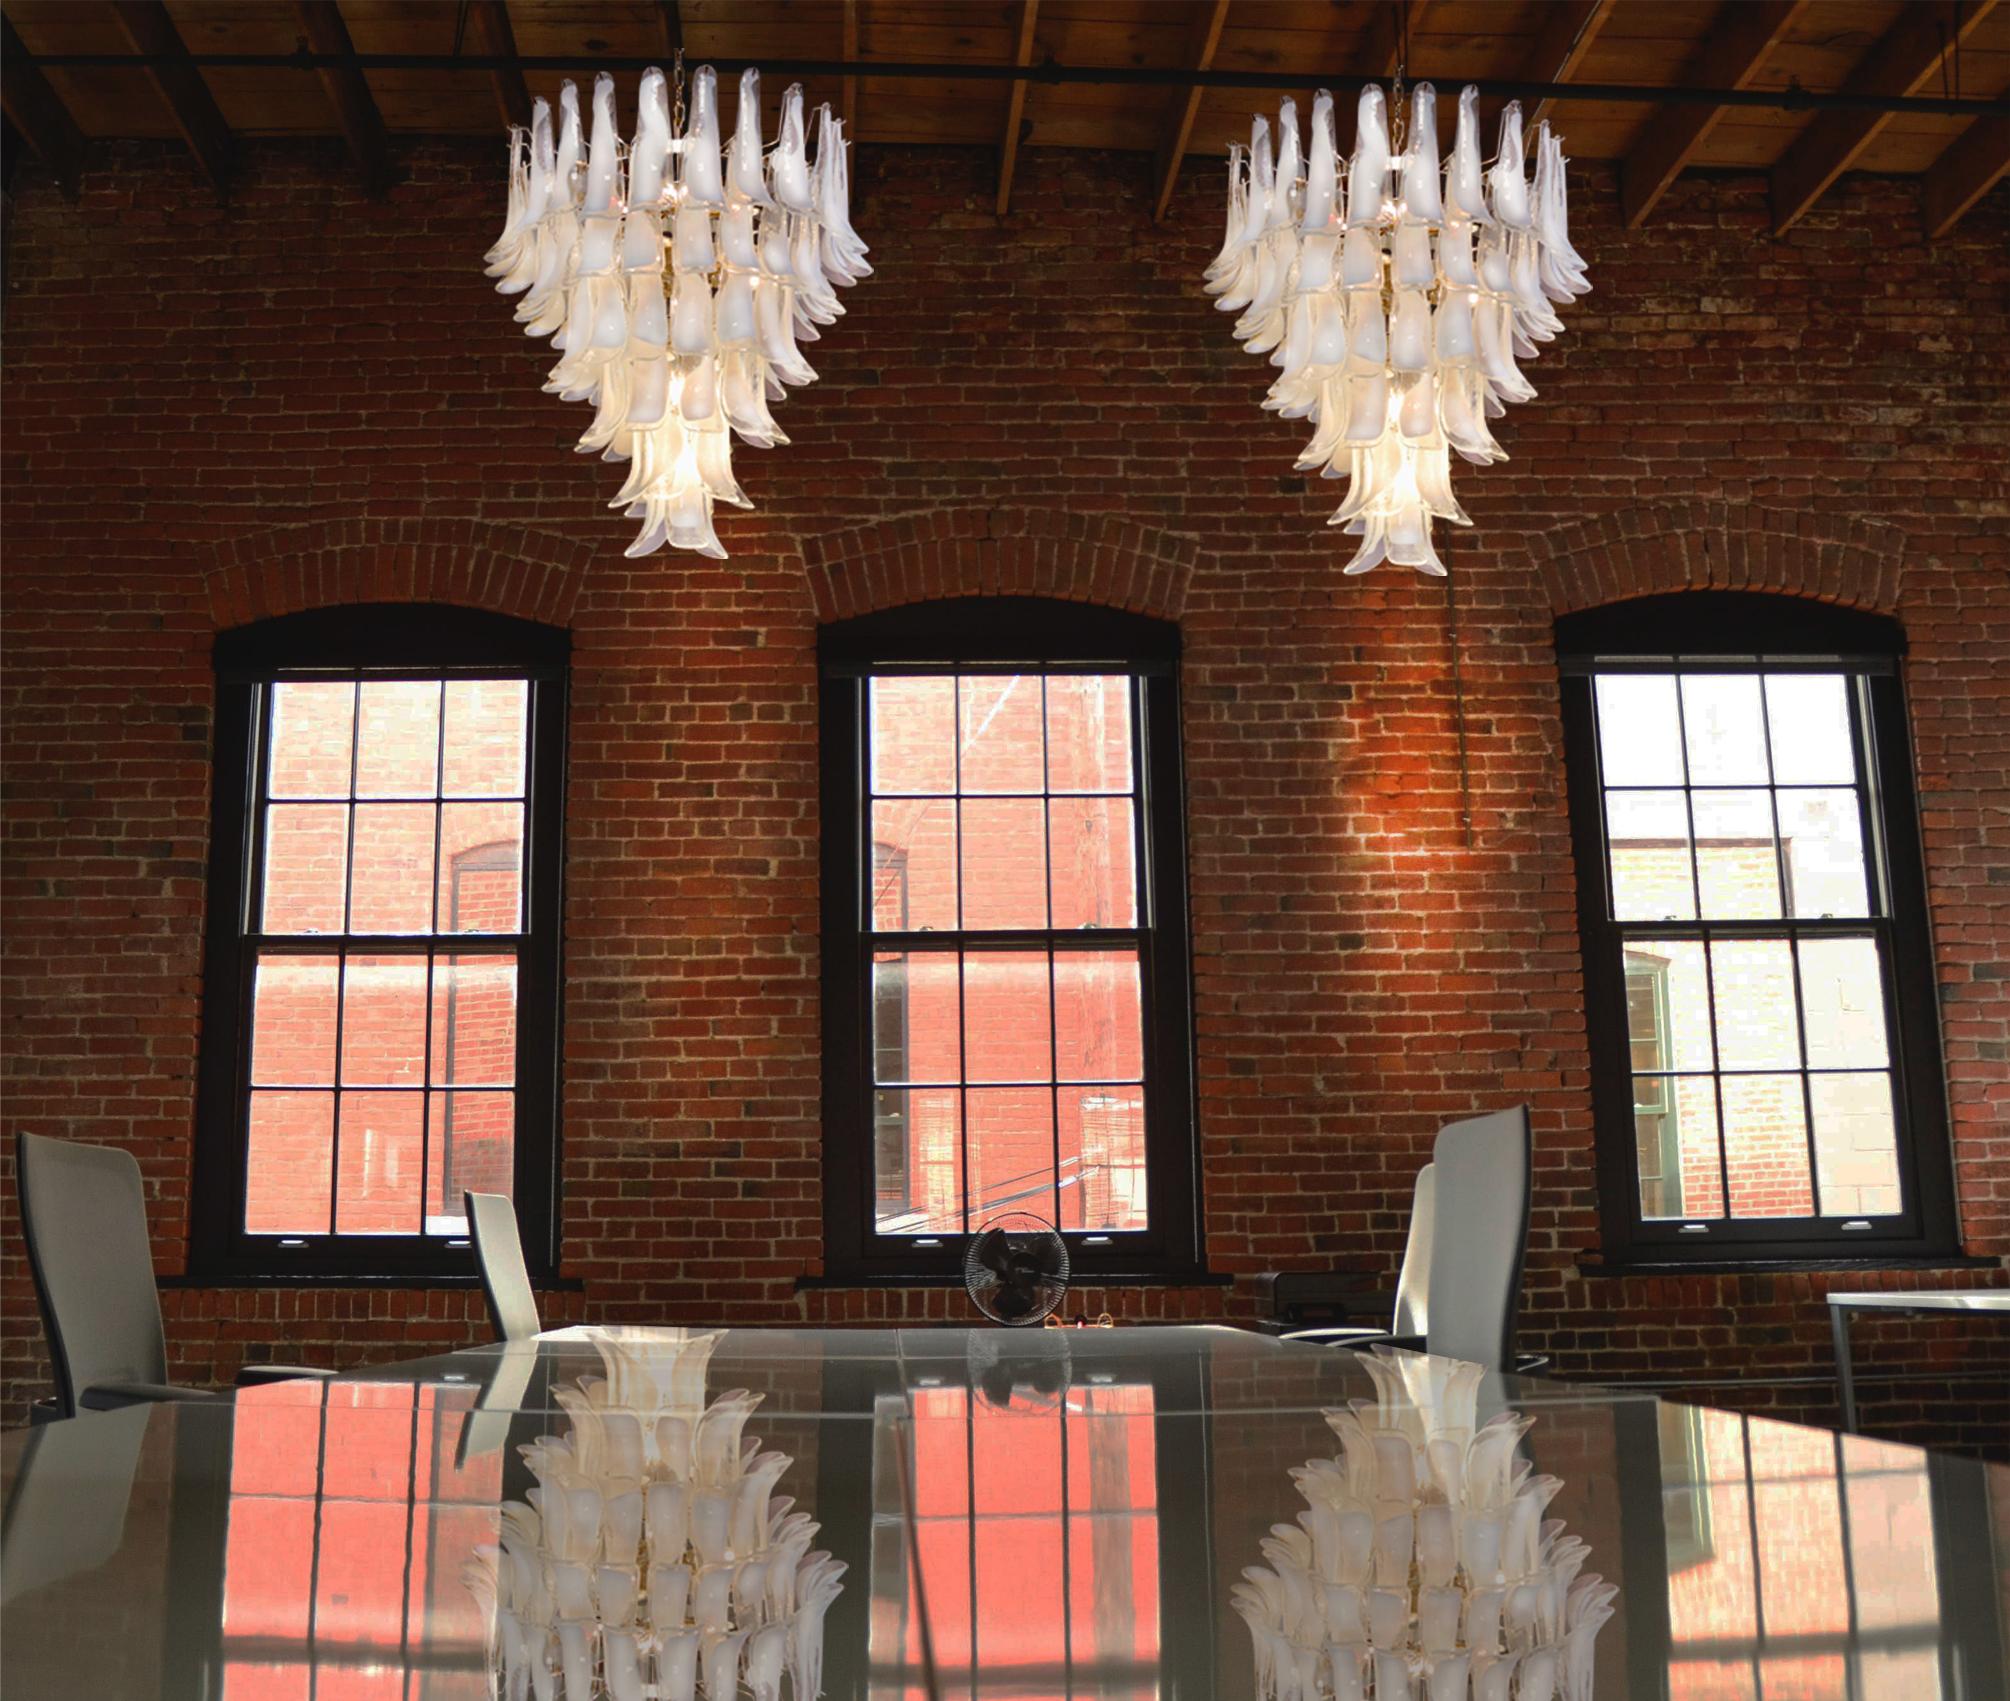 Pair chandeliers made by hand blown glass chandelier composed by 75 glass petals (transparent and white “lattimo”) in a chrome frame.
Dimensions: 65 inches (165 cm) height with chain, 37.40 inches (95 cm) height without chain, 31.50 inches (80 cm)